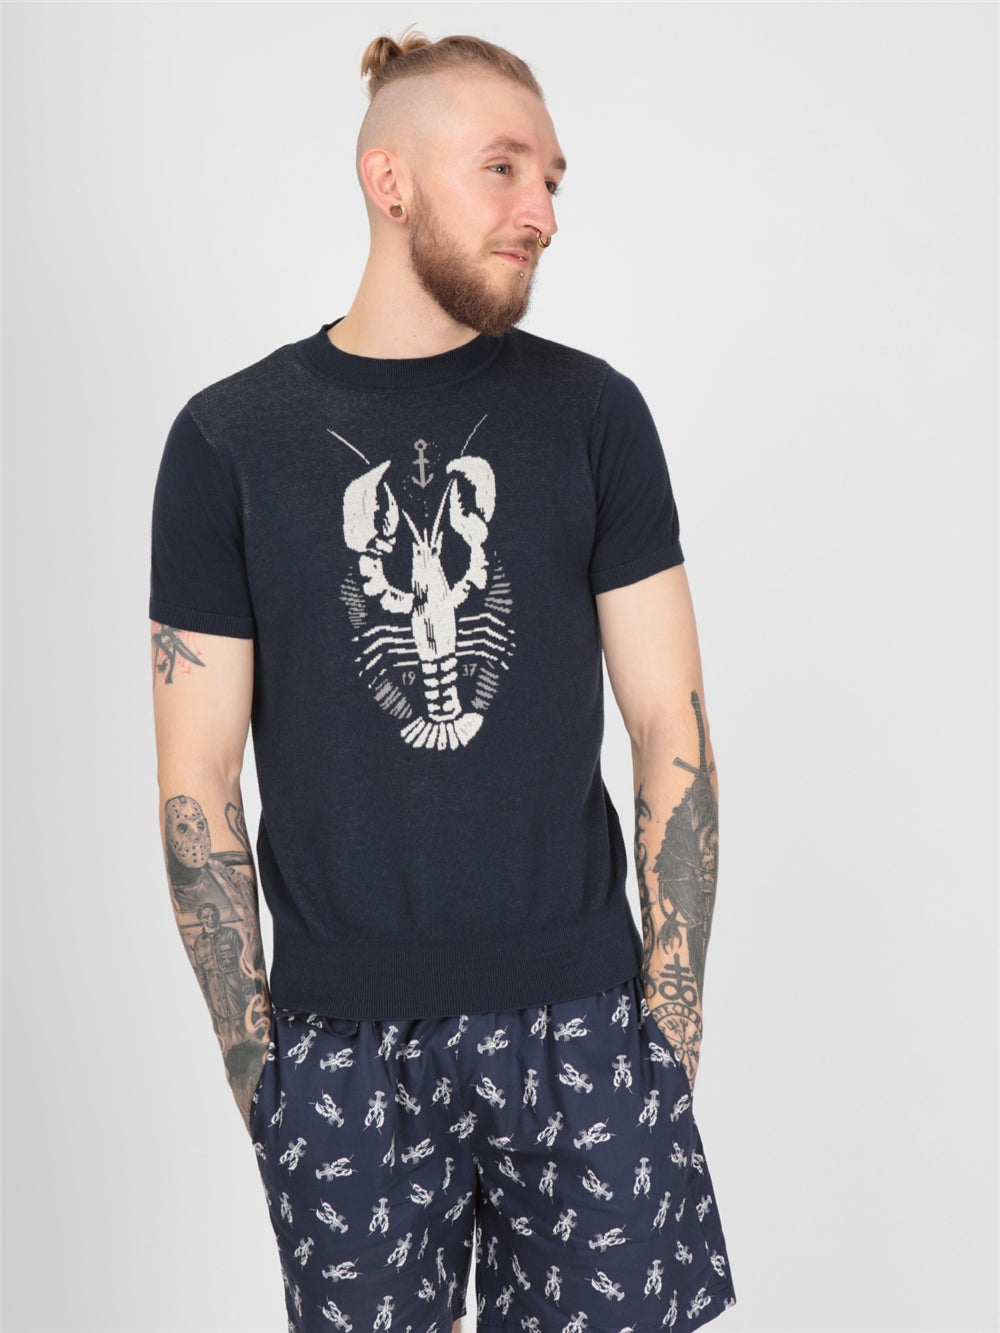 Scott Lobster Knitted Top by Collectif Menswear